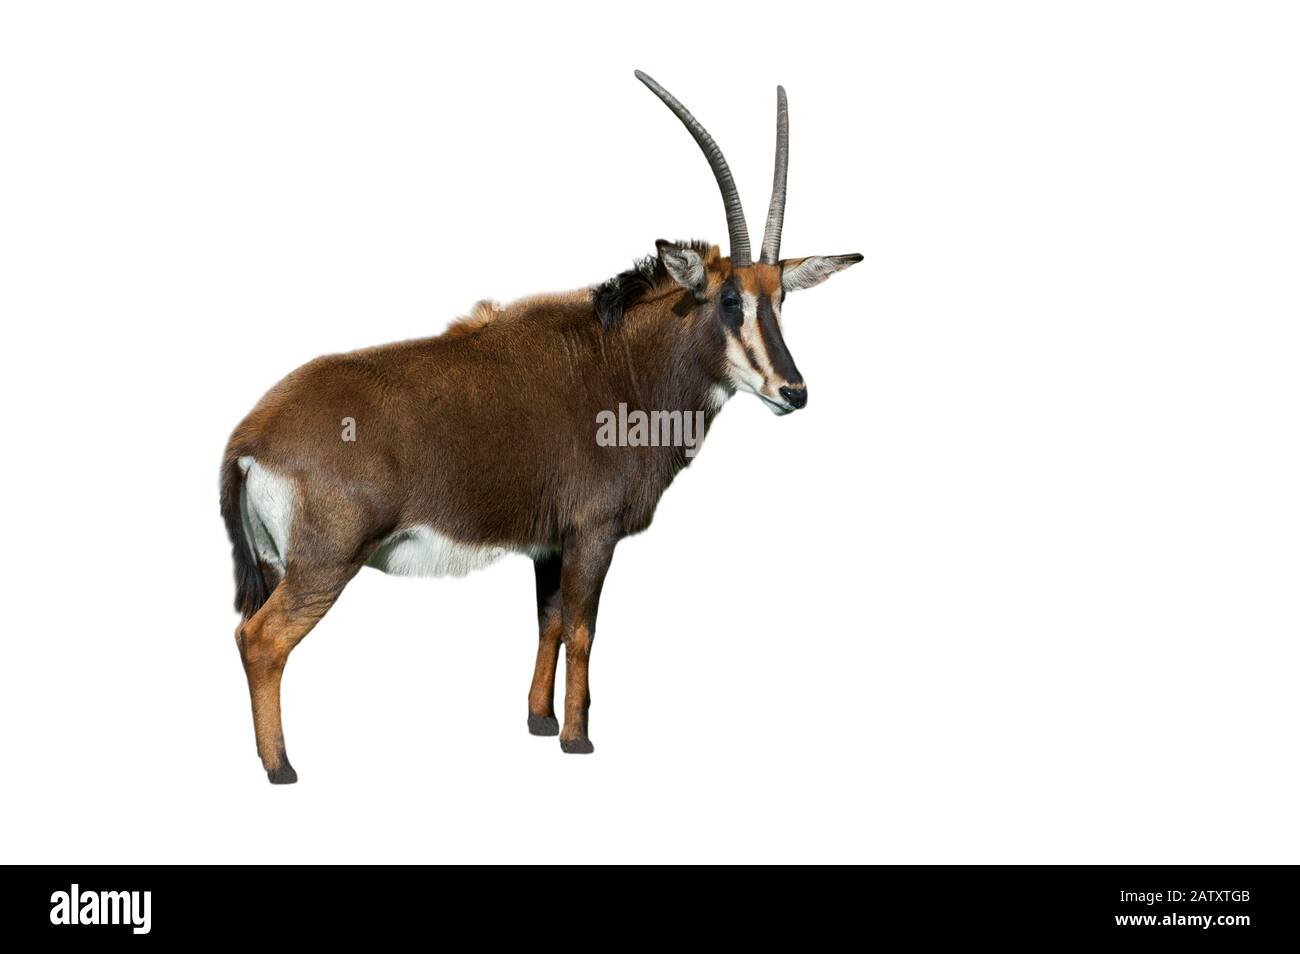 Sable antelope (Hippotragus niger) native to  East and Southern Africa against white background Stock Photo